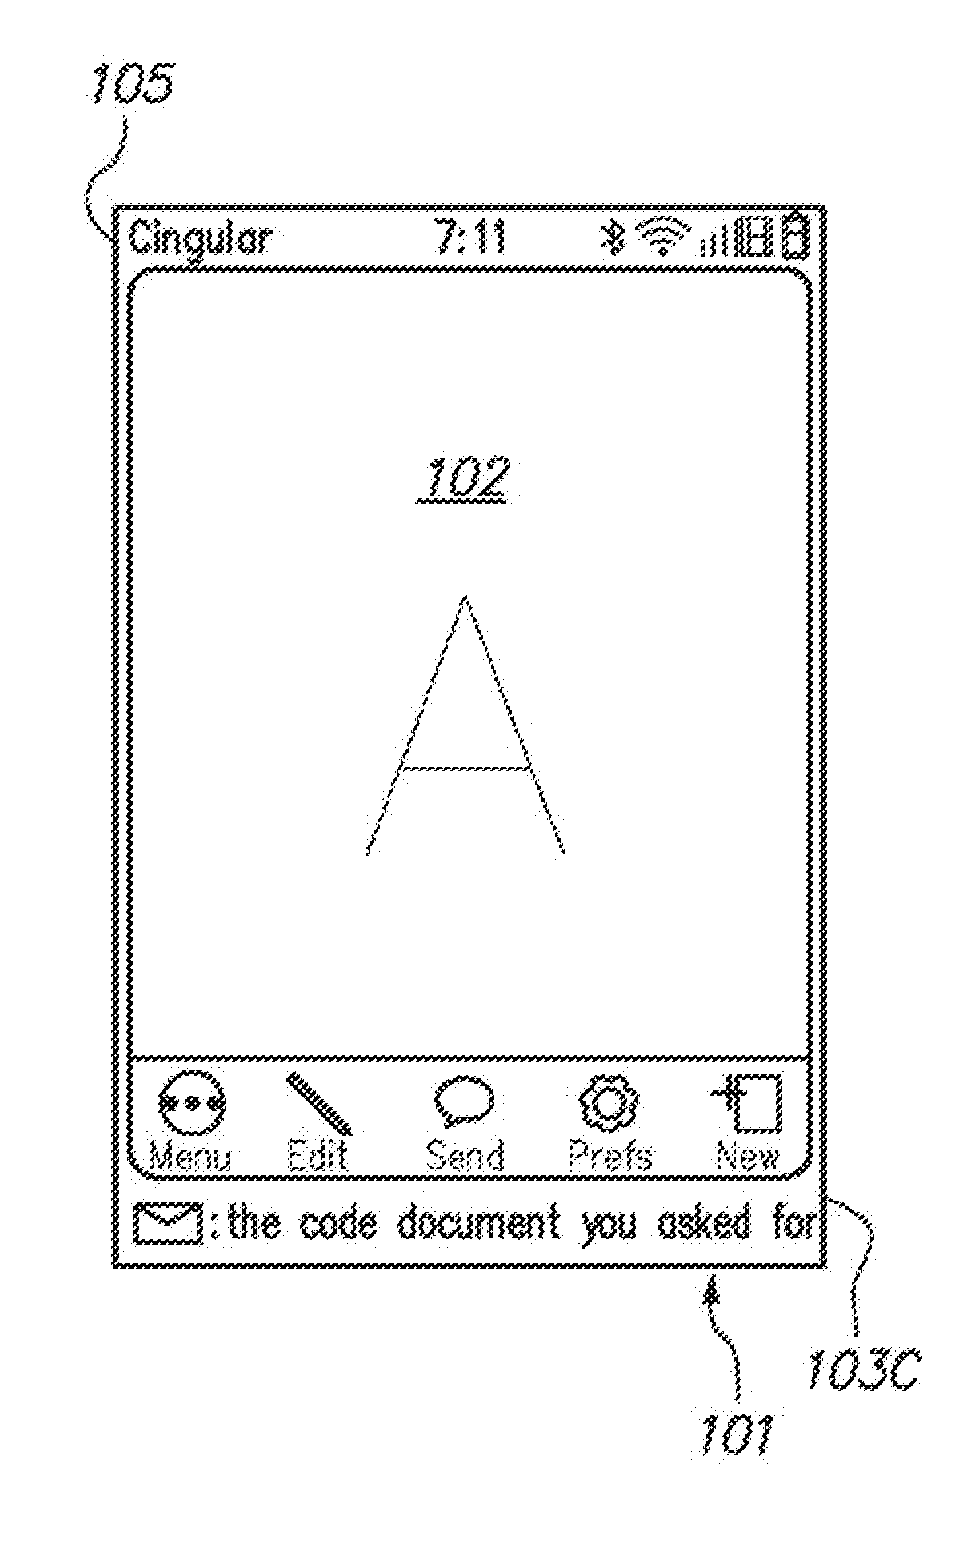 Notifying a user of events in a computing device